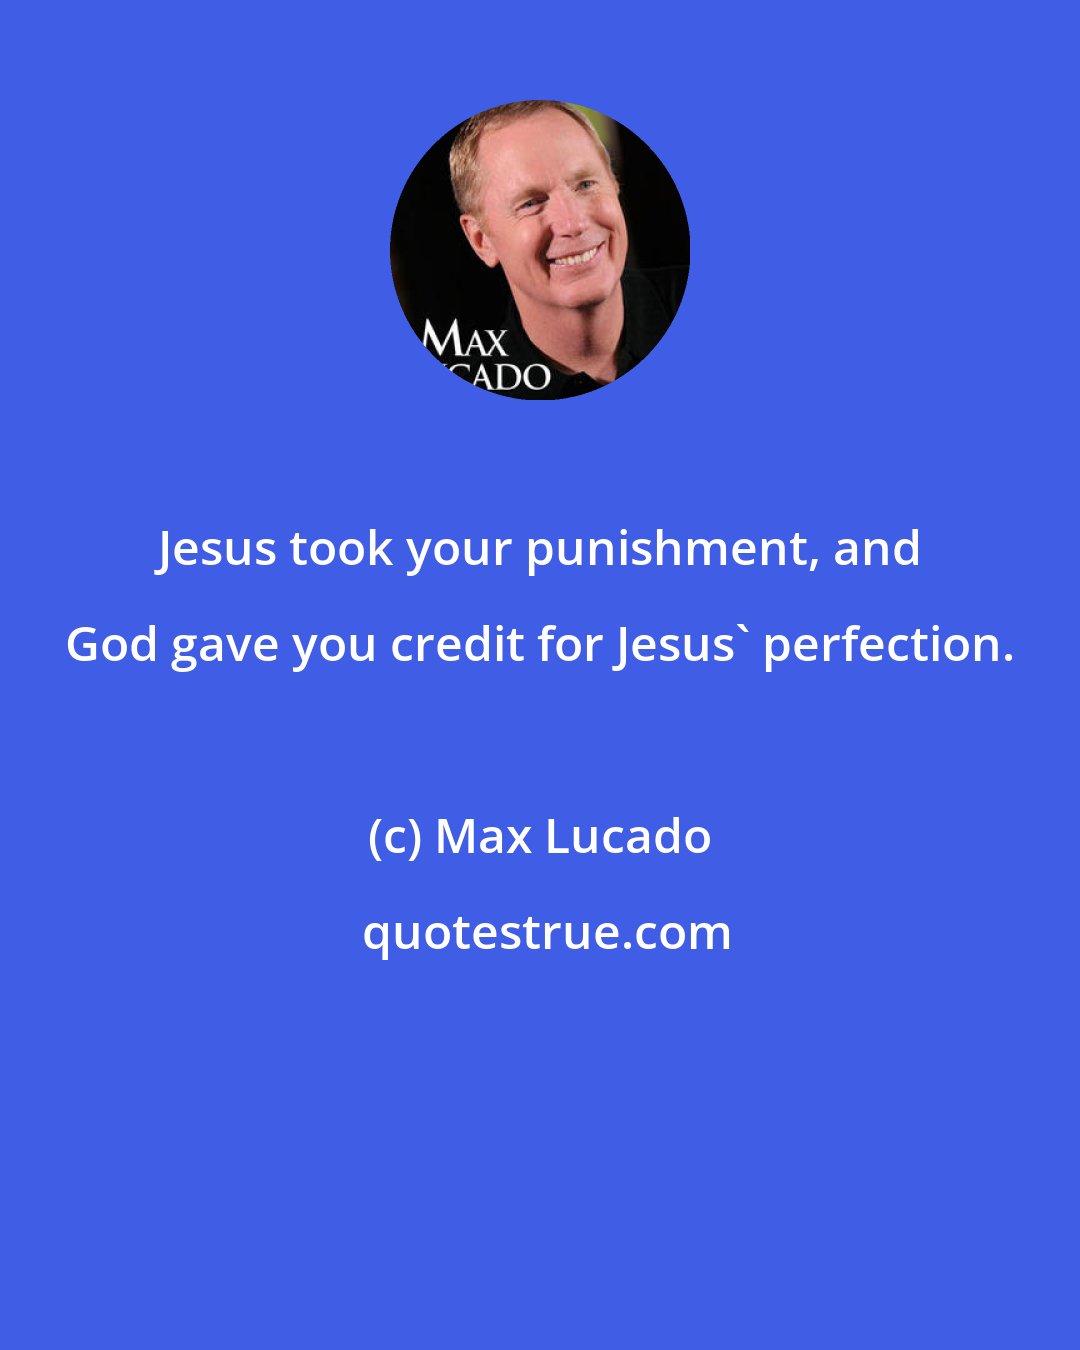 Max Lucado: Jesus took your punishment, and God gave you credit for Jesus' perfection.